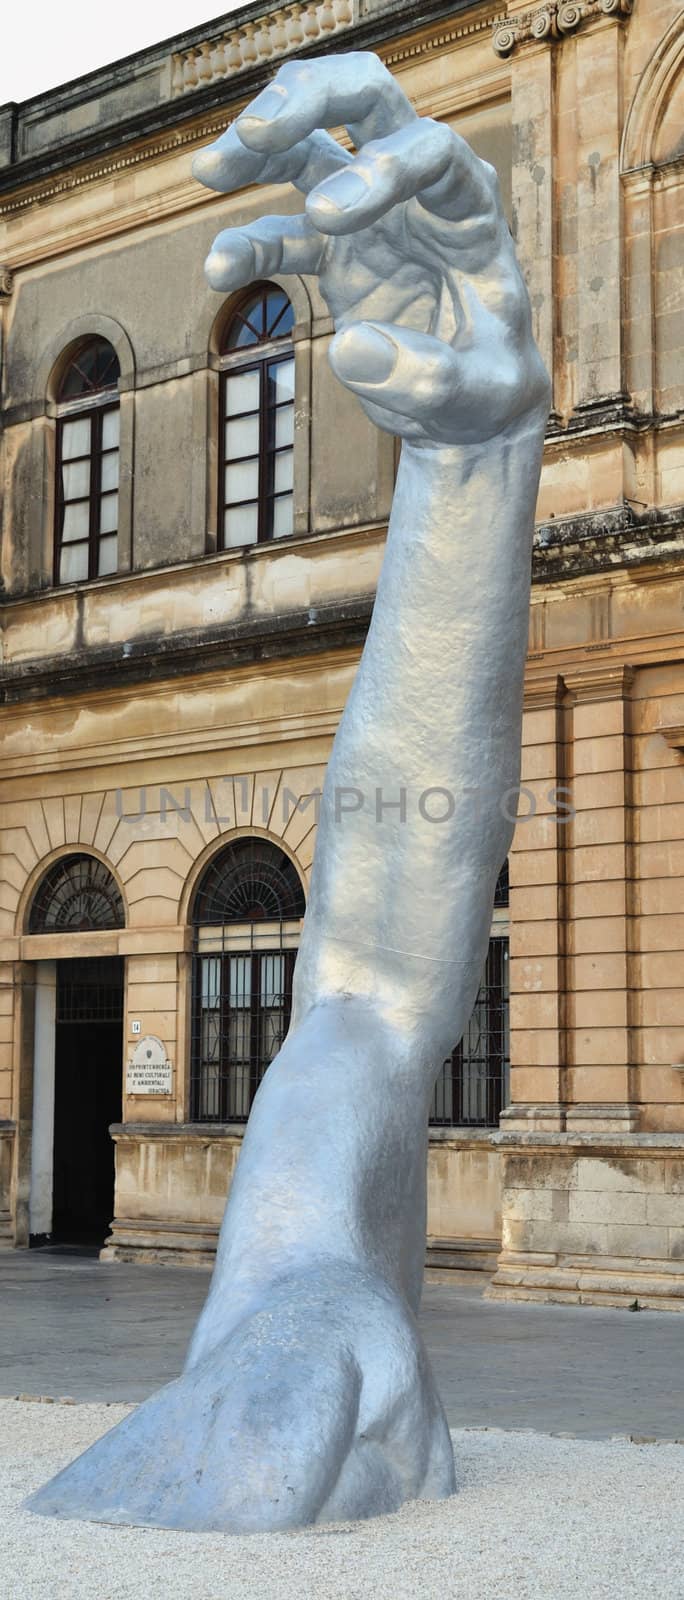 details of a sculpture involving a man half-submerged. It is located in the main square